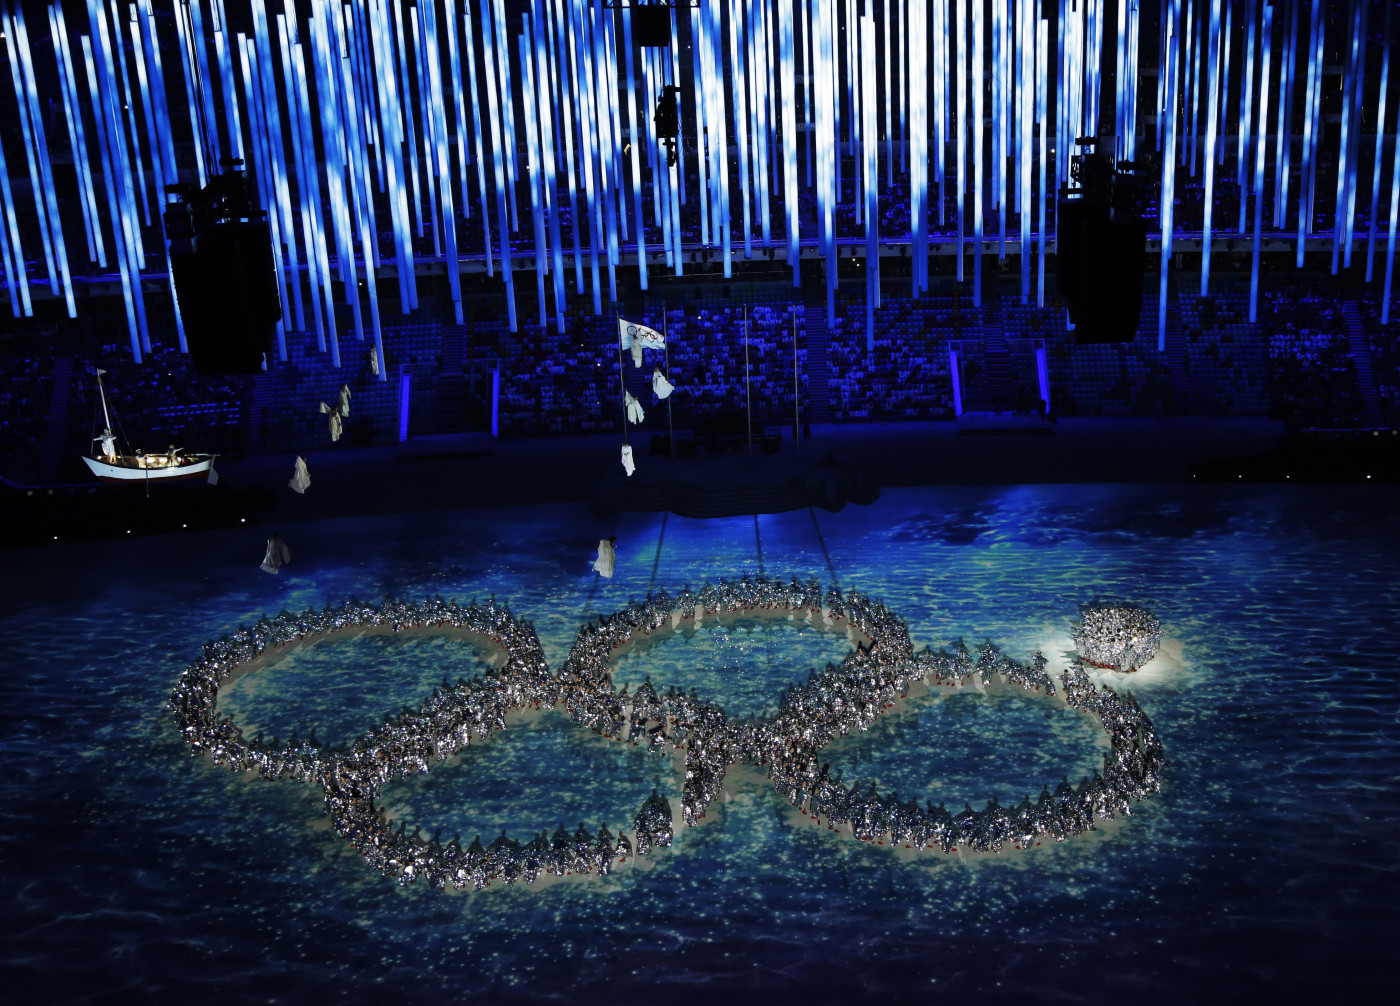 Performers recreate the fifth Olympic ring that didn't open in the opening ceremony during the closing ceremony of the 2014 Winter Olympics, Sunday, Feb. 23, 2014, in Sochi, Russia. (David J. Phillip—AP)